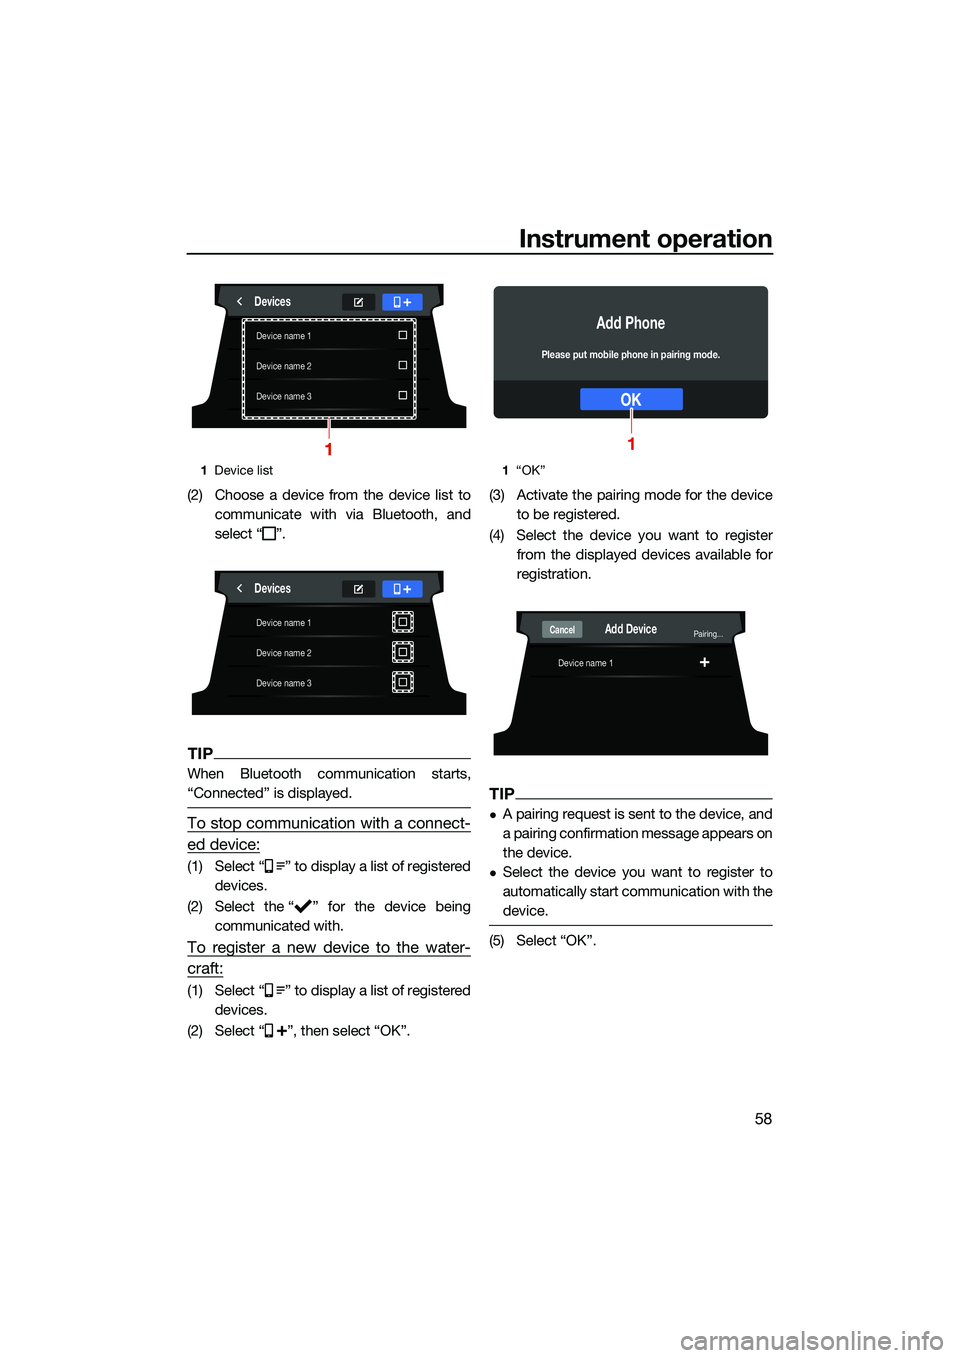 YAMAHA FX HO CRUISER 2022 Repair Manual Instrument operation
58
(2) Choose a device from the device list tocommunicate with via Bluetooth, and
select “ ”.
TIP
When Bluetooth communication starts,
“Connected” is displayed.
To stop co